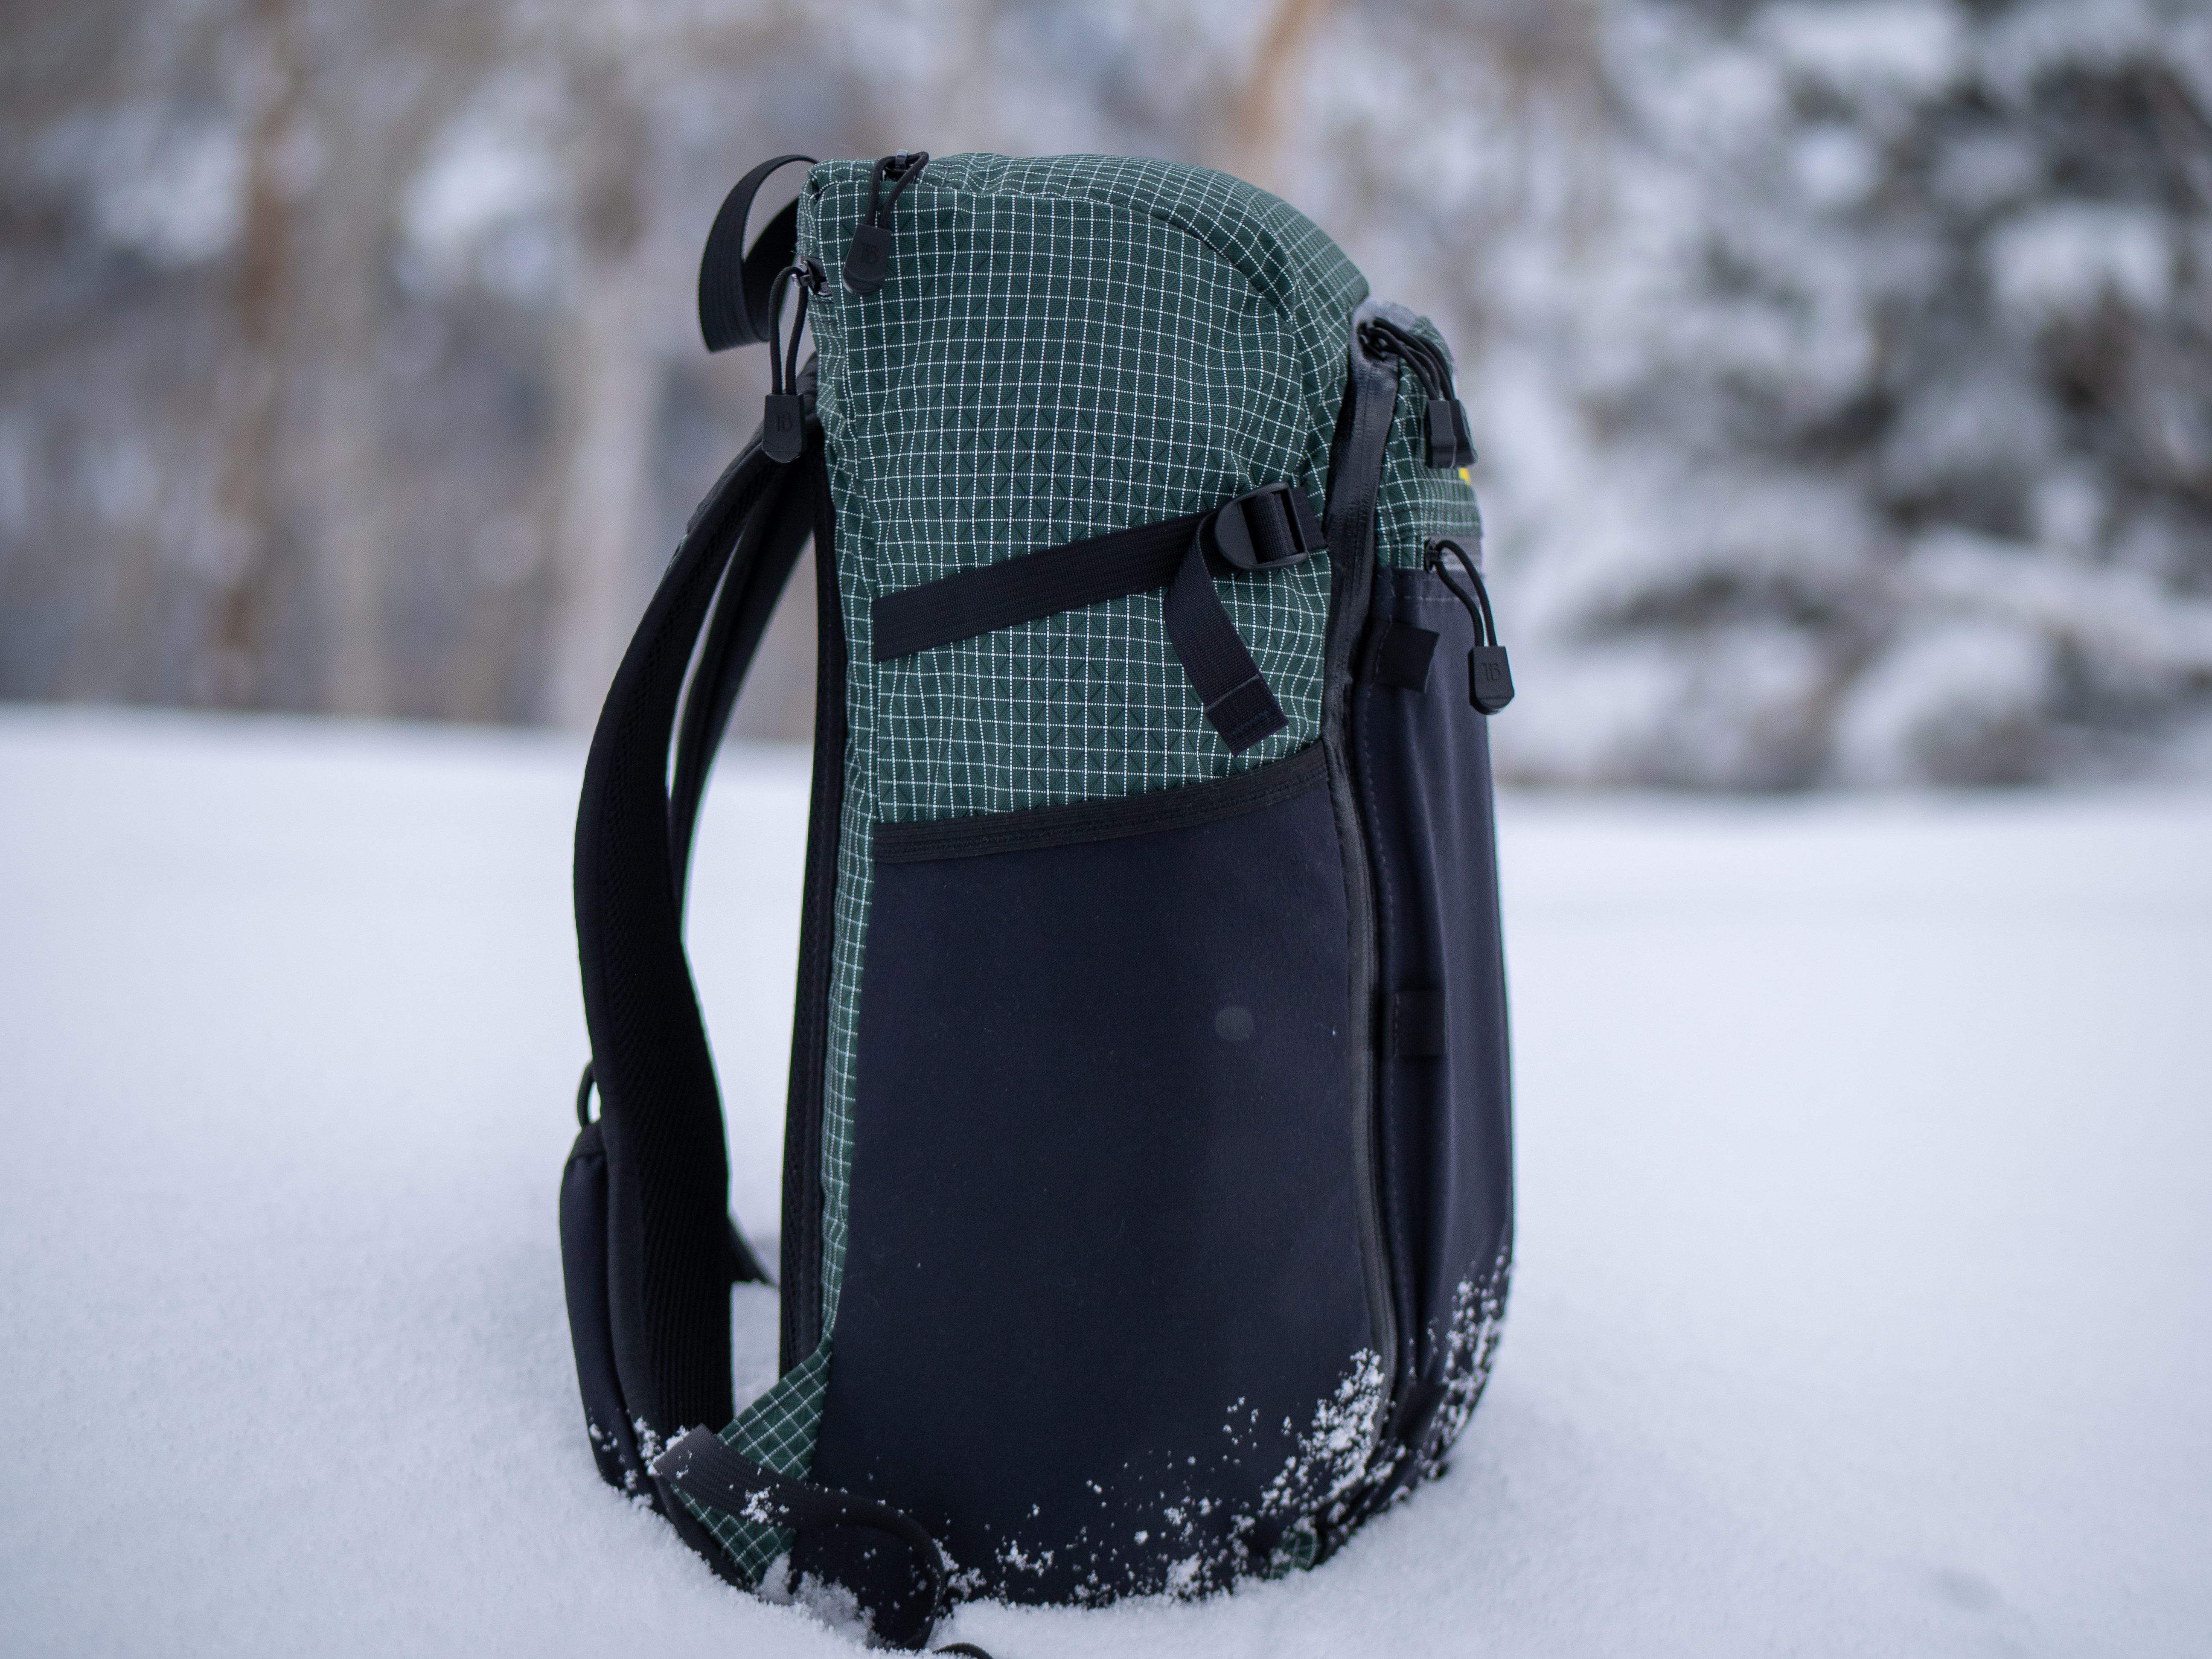 ula ultralight equipment dragonfly side of pack in snow with bottle pockets